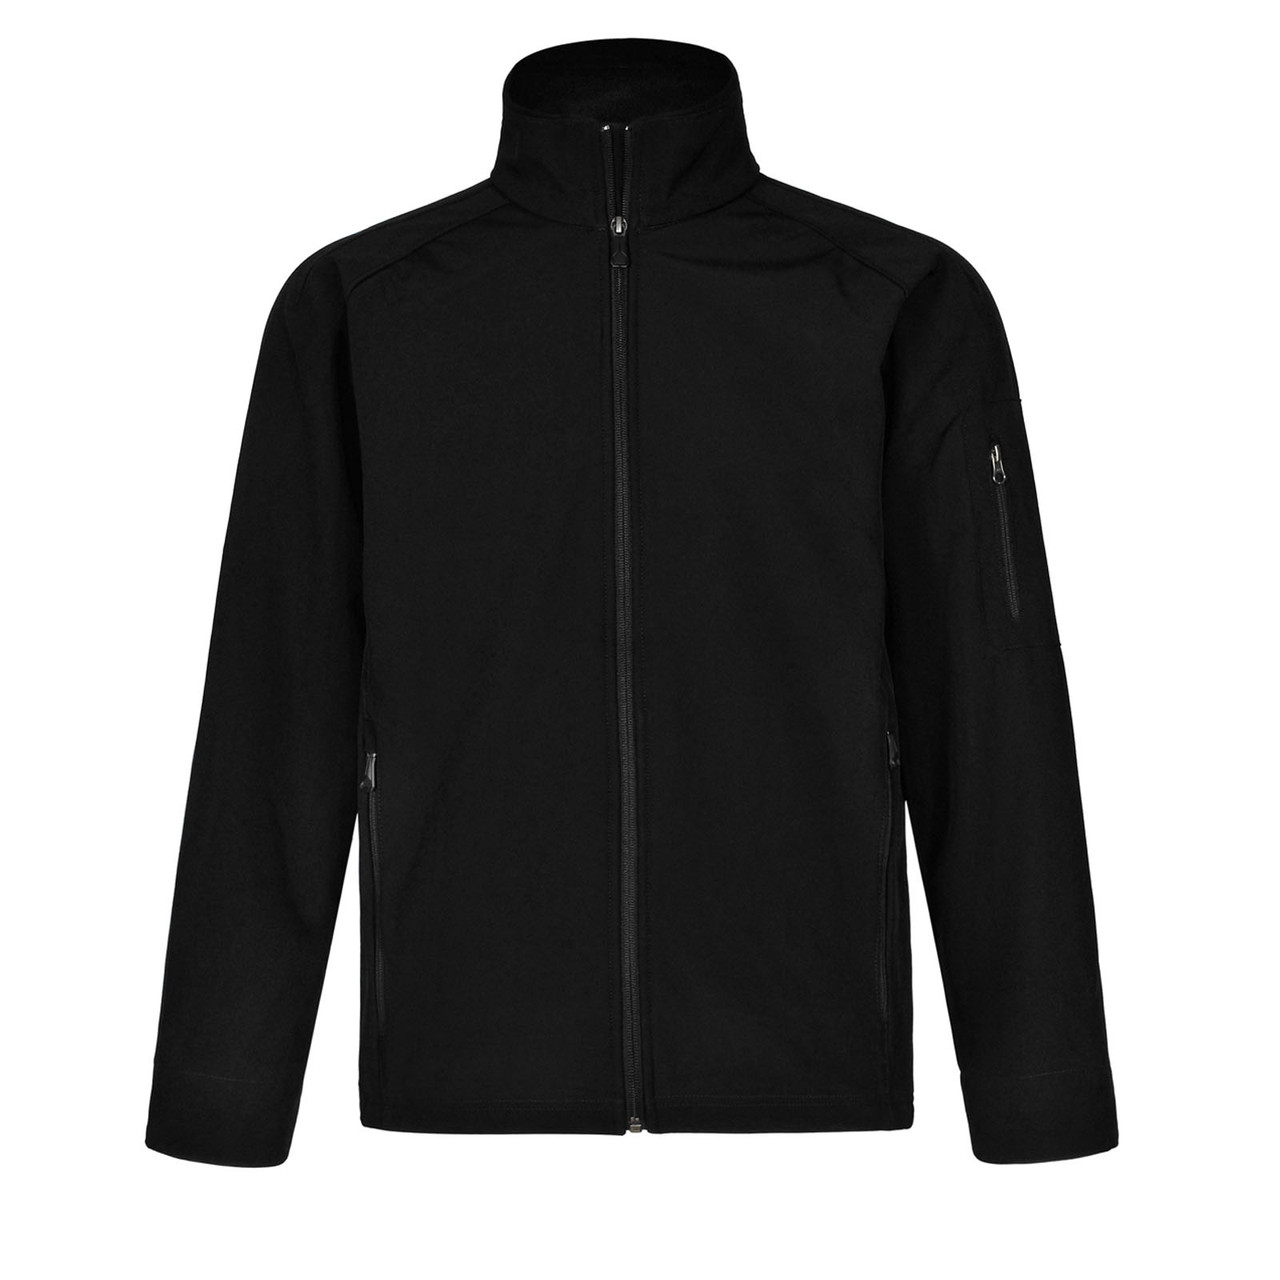 Mens Stretchy Softshell High-Tech Jacket | Shop Winter Jackets Online